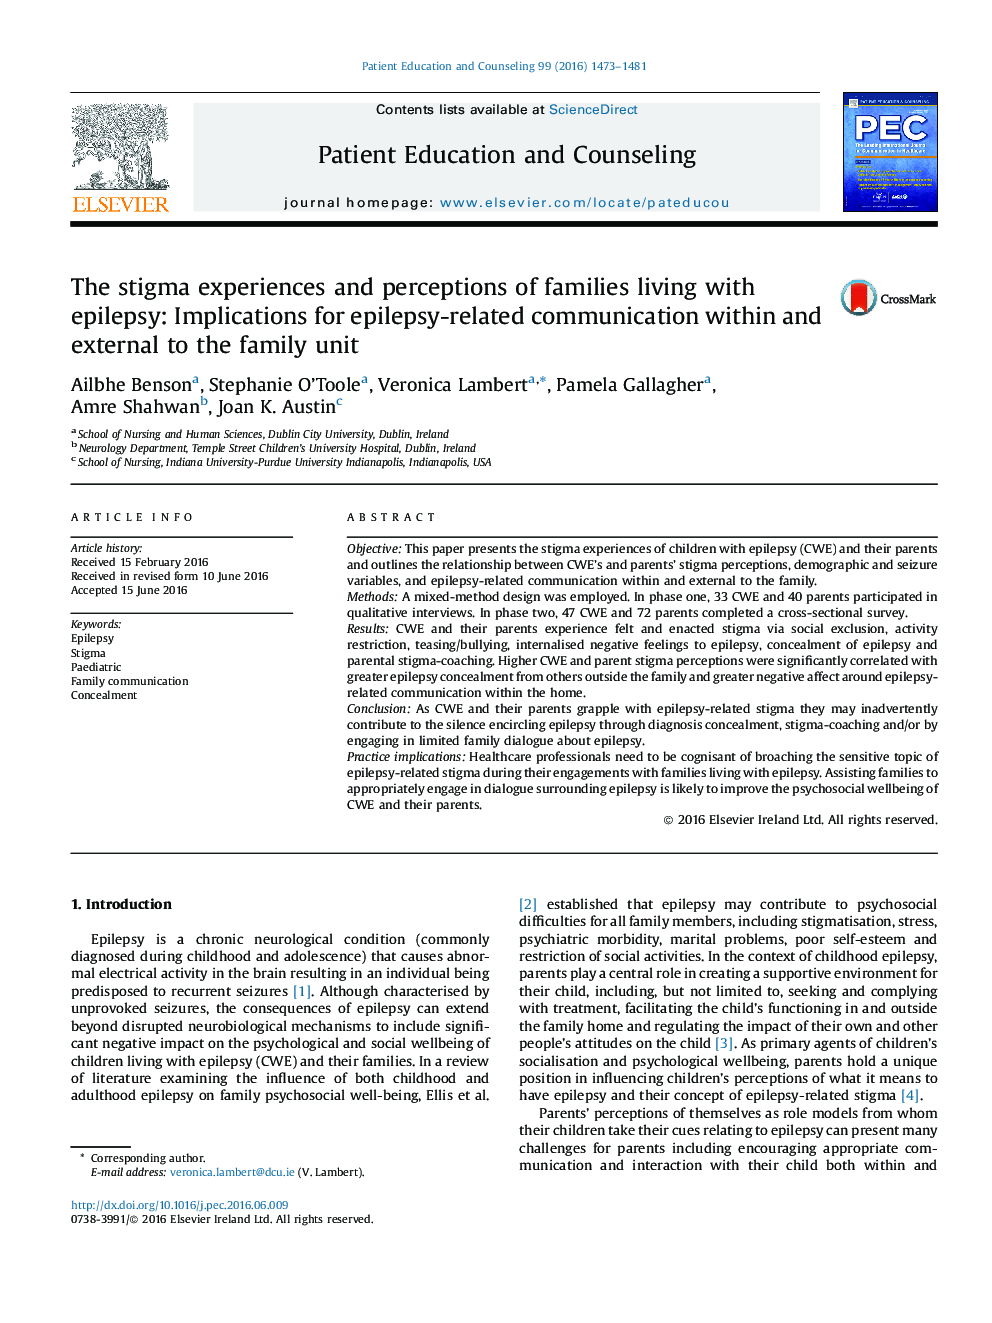 The stigma experiences and perceptions of families living with epilepsy: Implications for epilepsy-related communication within and external to the family unit